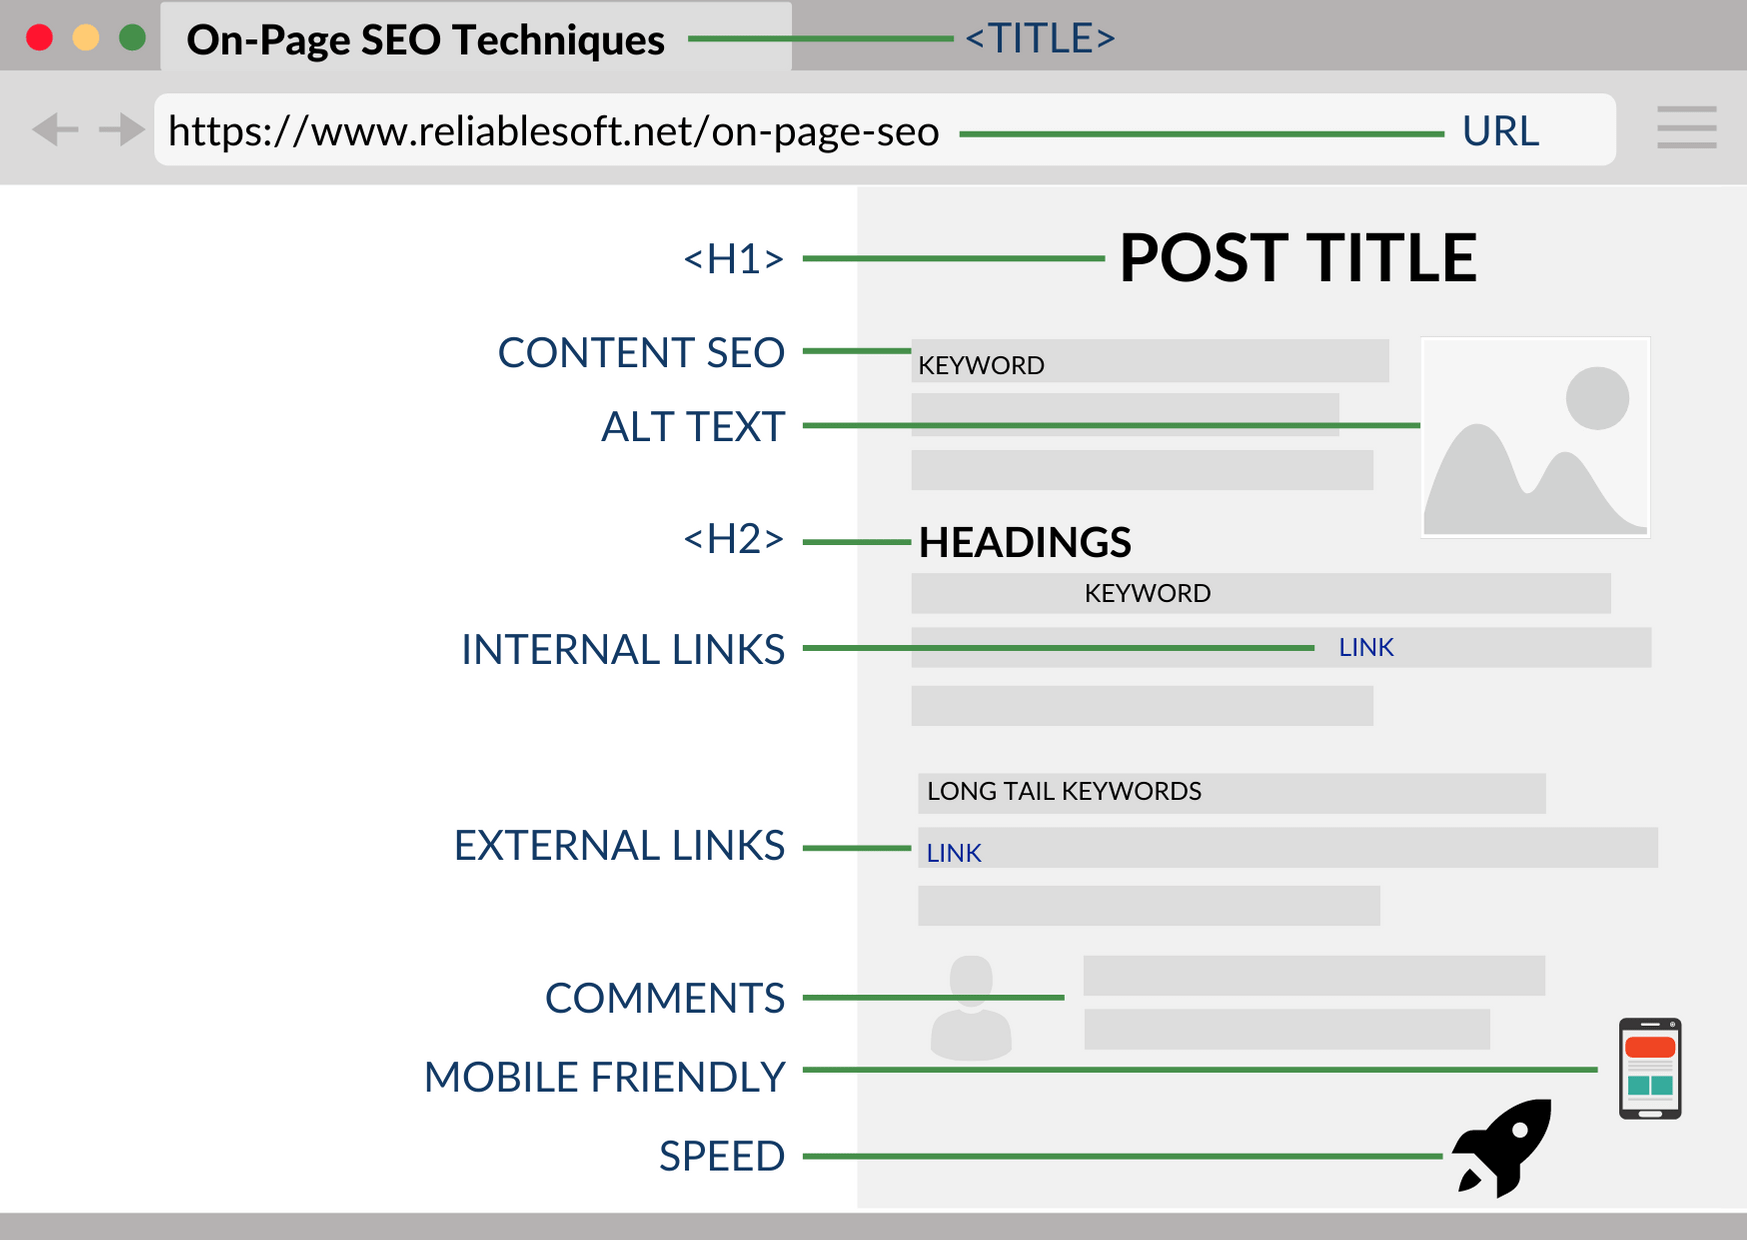 on page SEO article checklist to create and write perfect SEO articles for yourself or your organization.